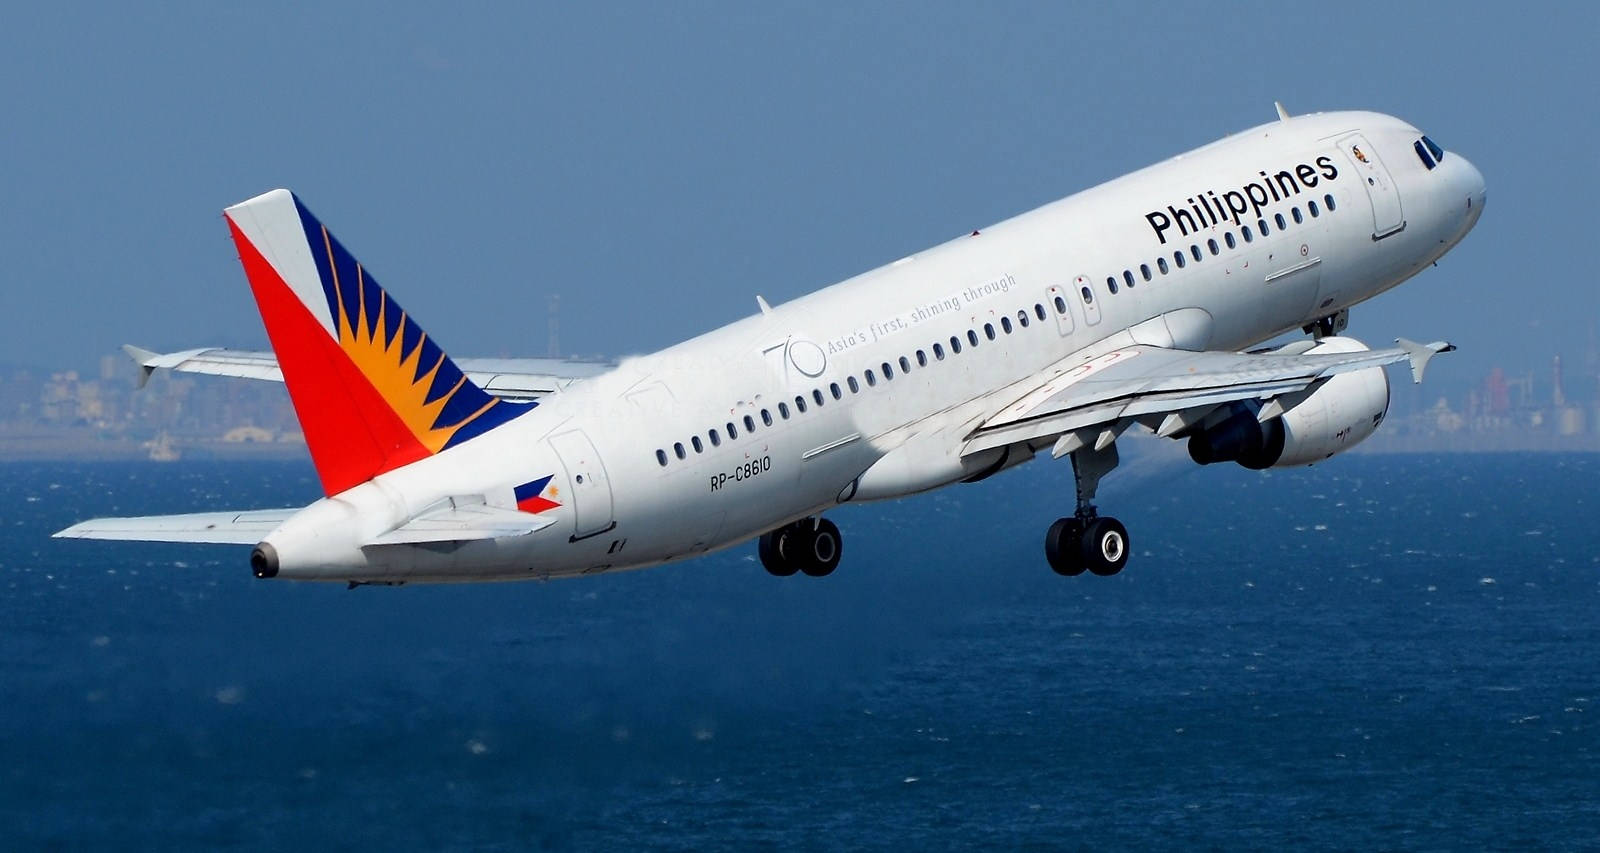 Philippine Airlines Flying Above The Sea Wallpaper